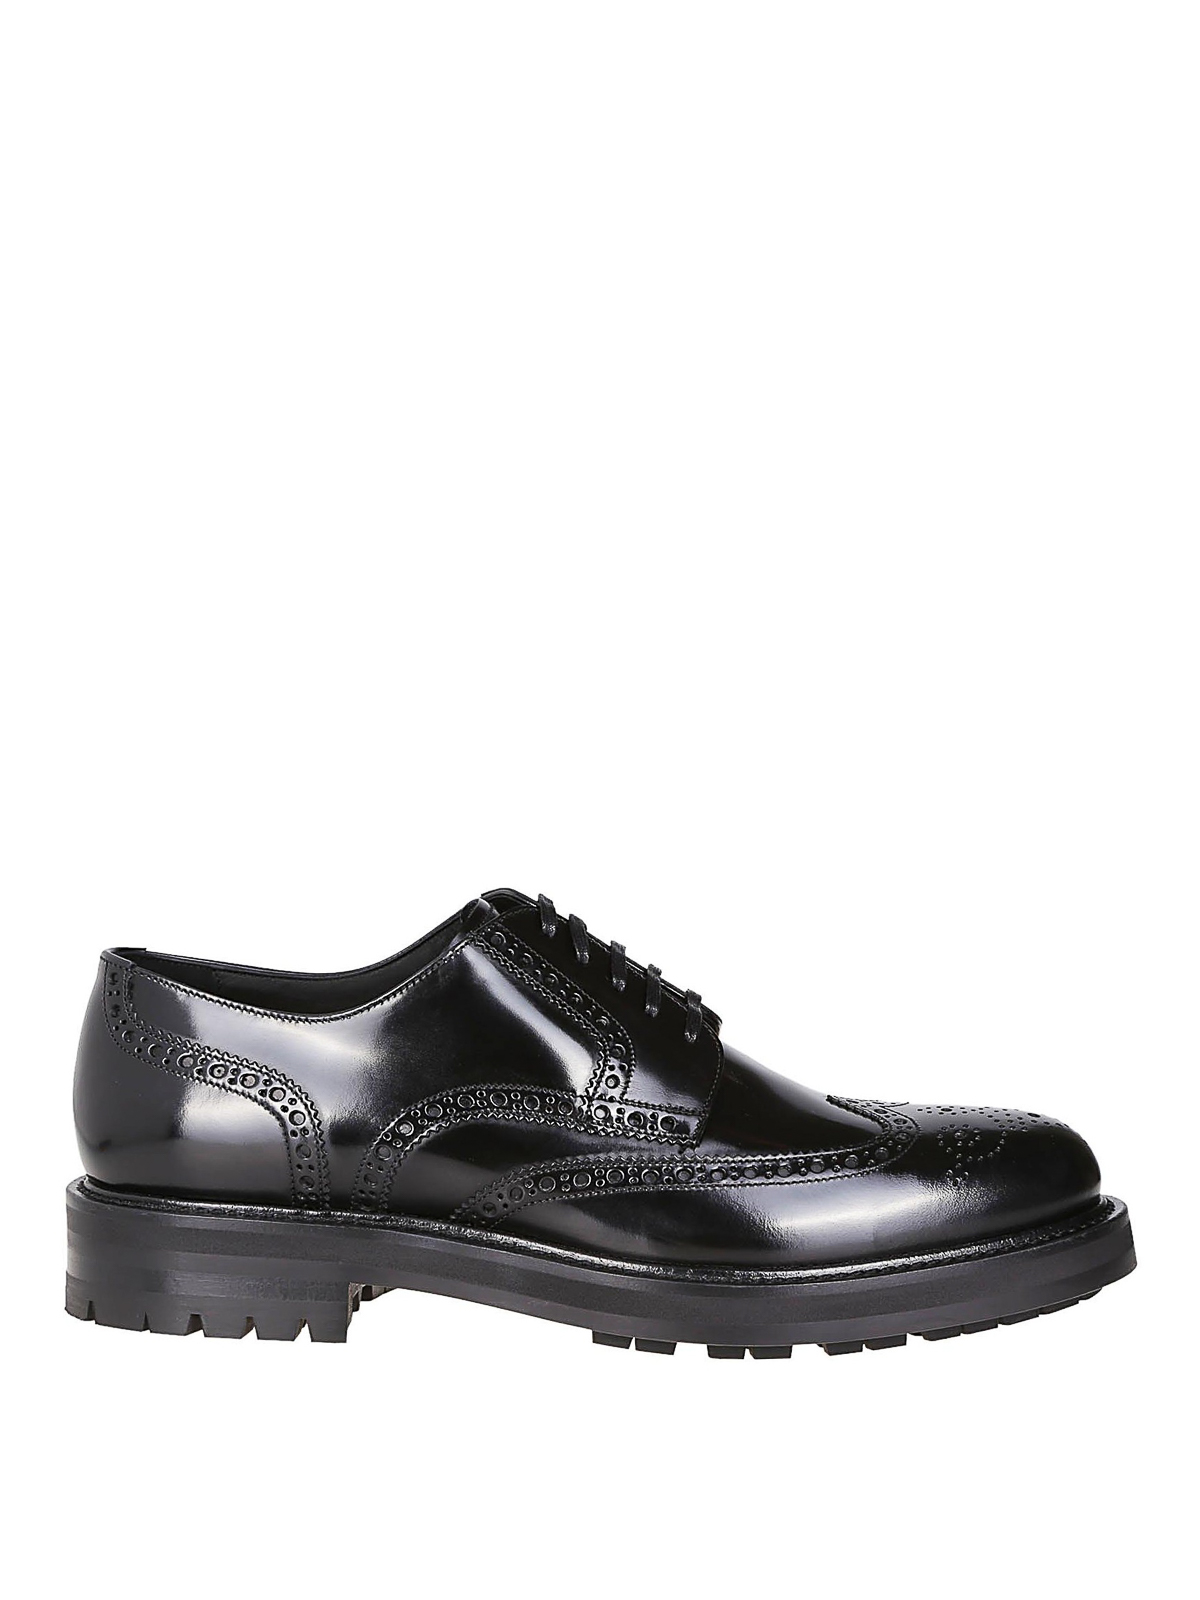 Lace-ups shoes Dolce & Gabbana - Brushed calfskin brogue derby shoes ...